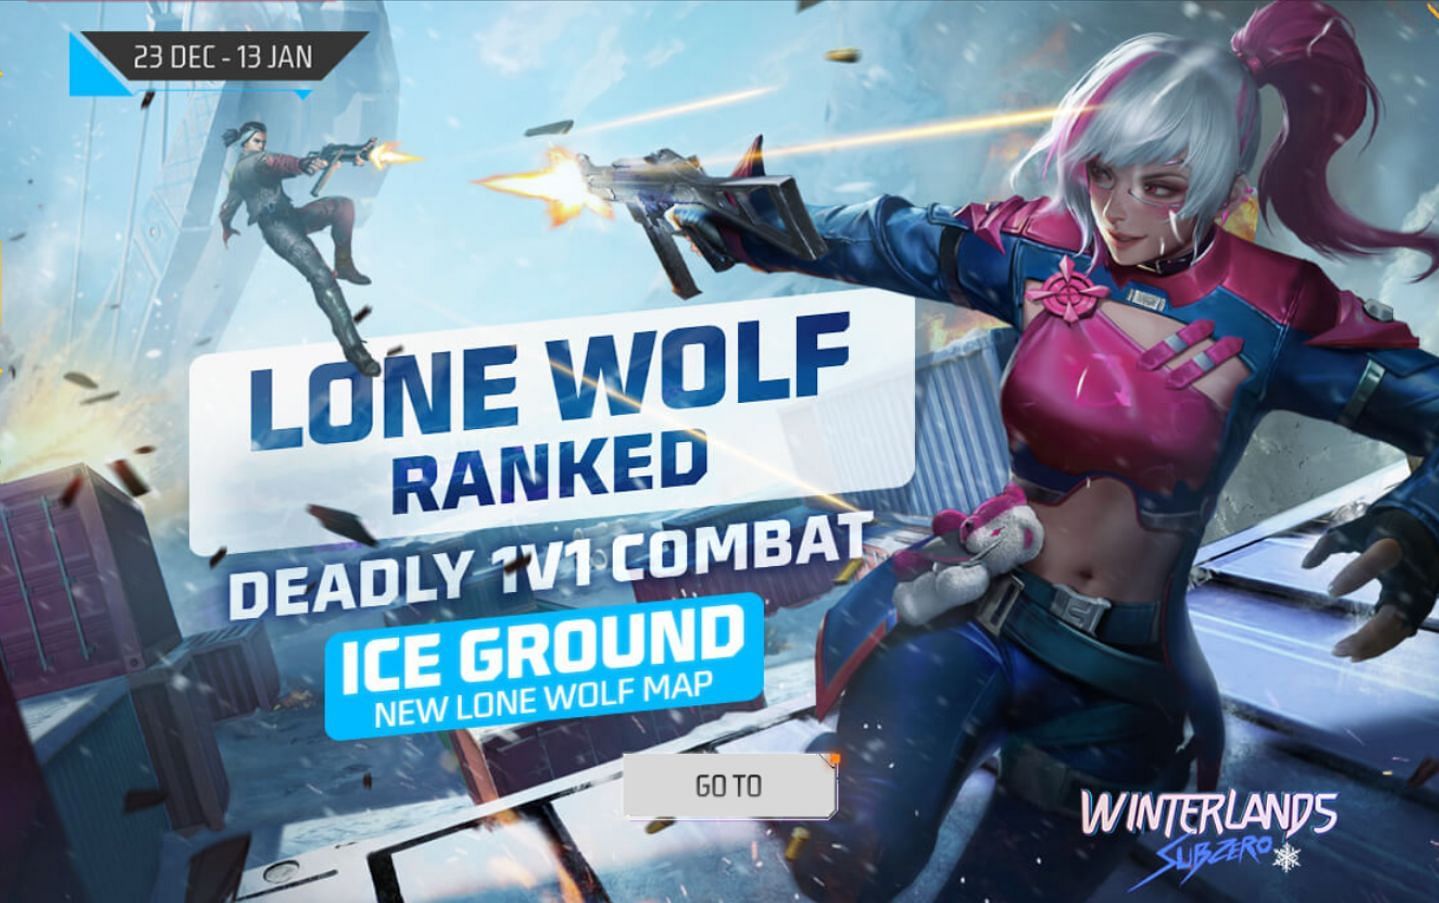 The much-anticipated Ice Ground map is now available in the selection menu of Lone Wolf matches (Image via Garena)